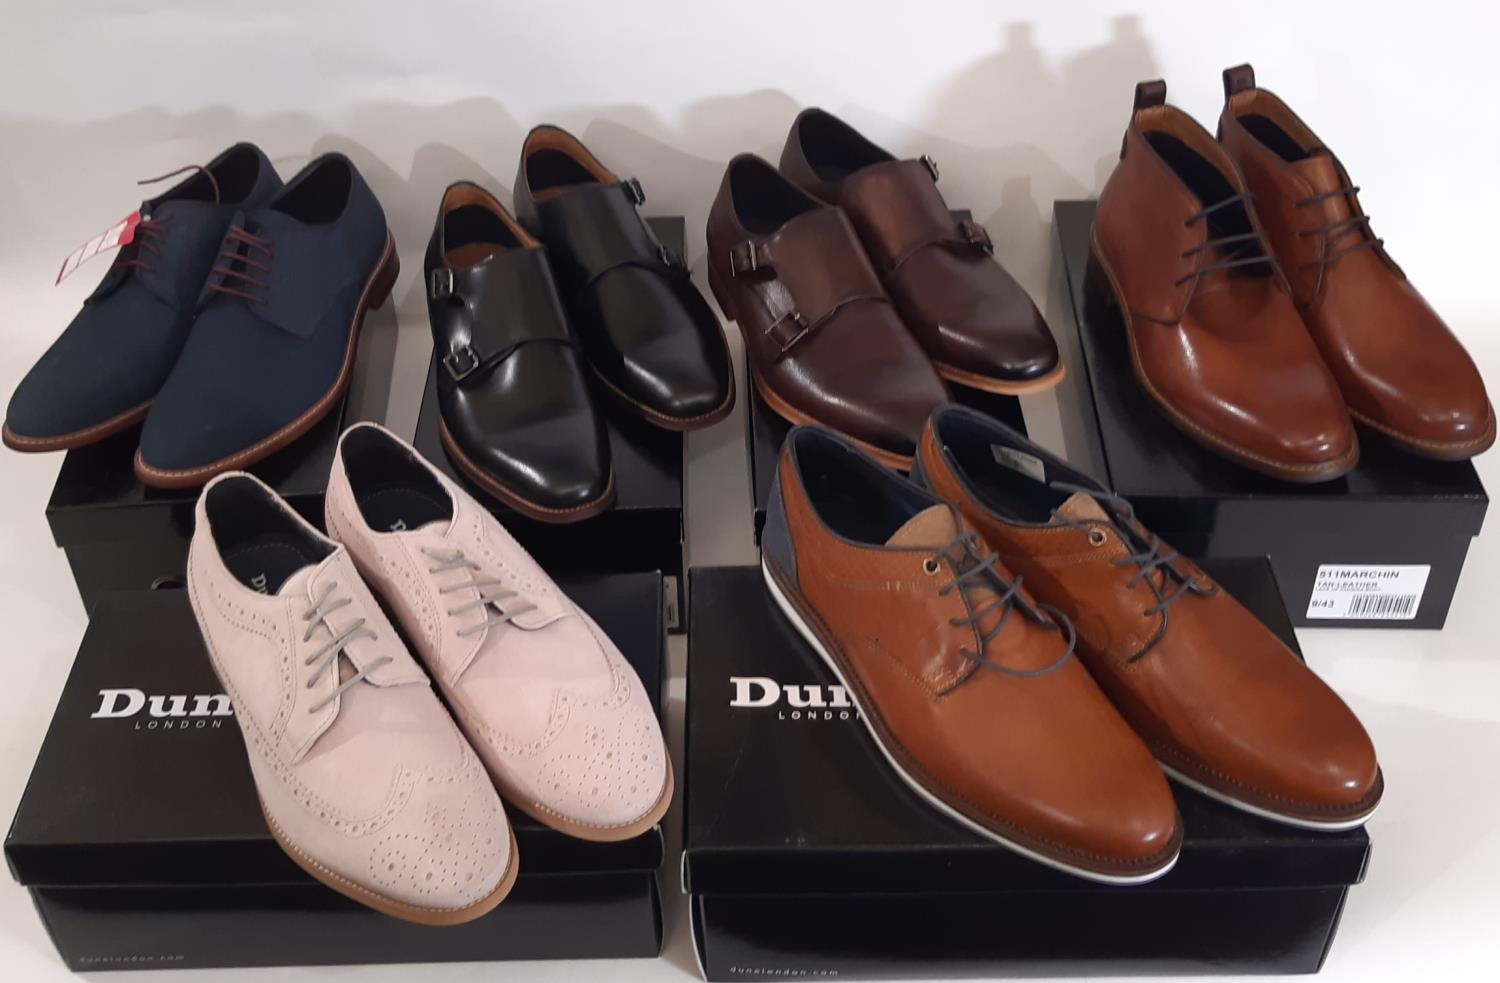 6 pairs of men's brogue shoes and boots by Dune, all size 9, boxed and appear unworn